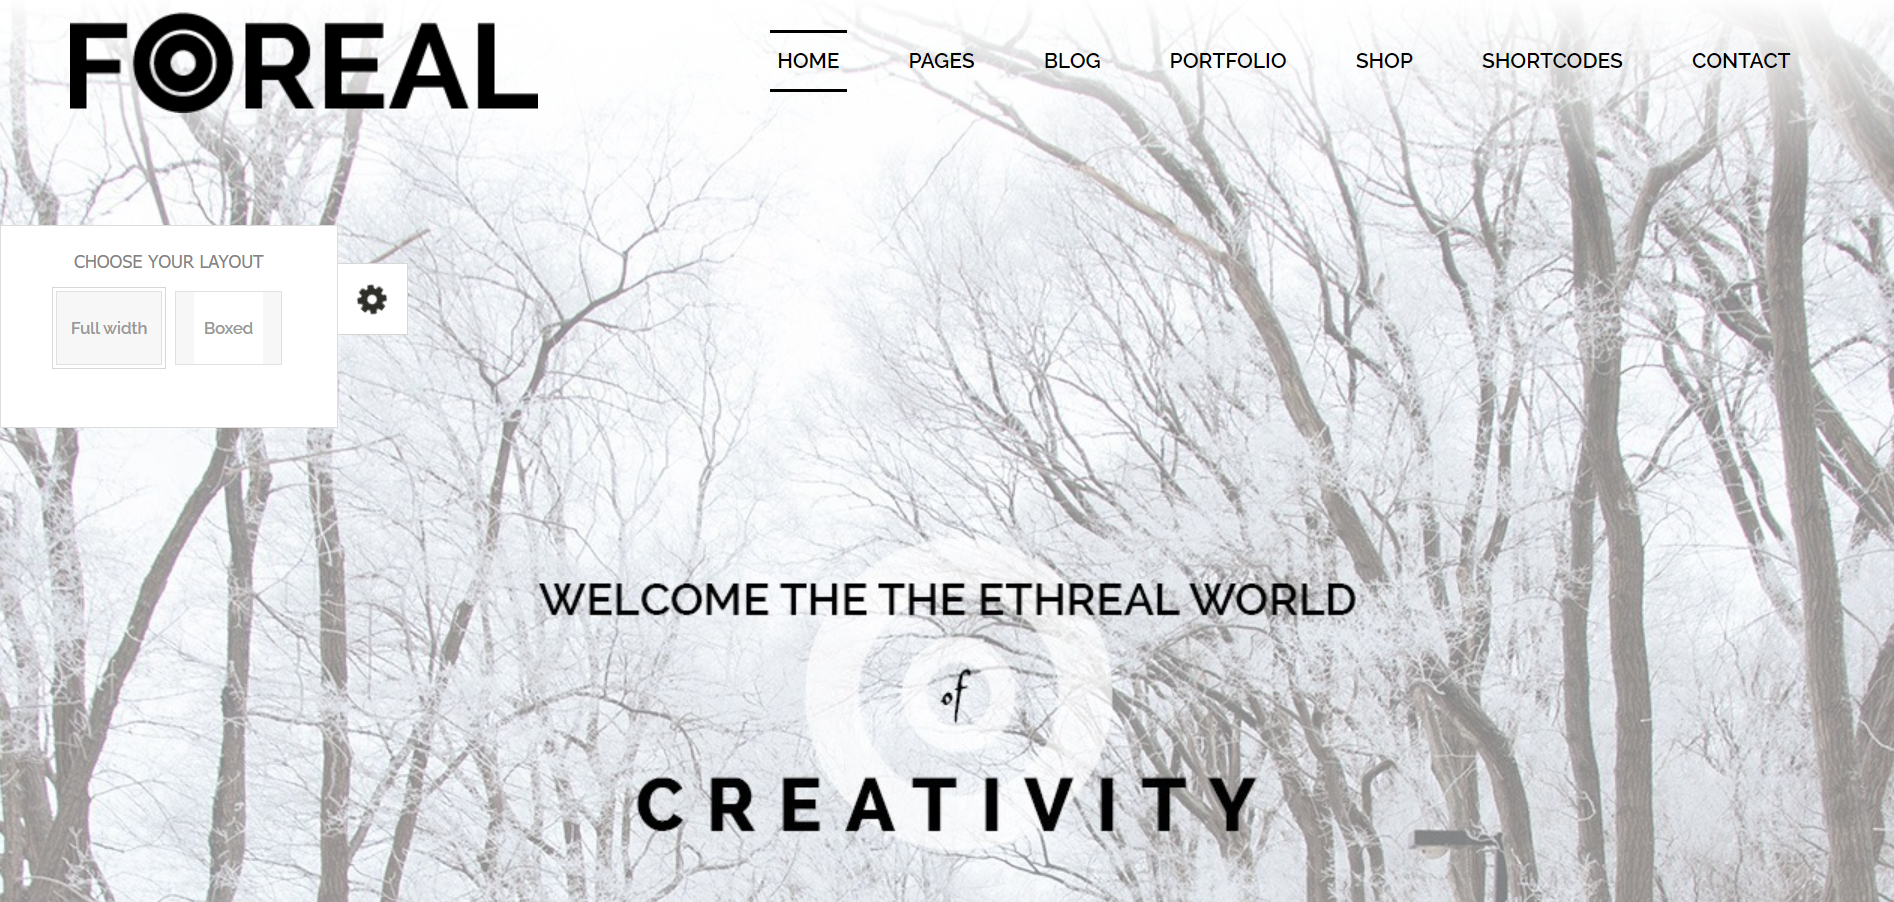 Foreal - Best WordPress Themes for Writers and Authors